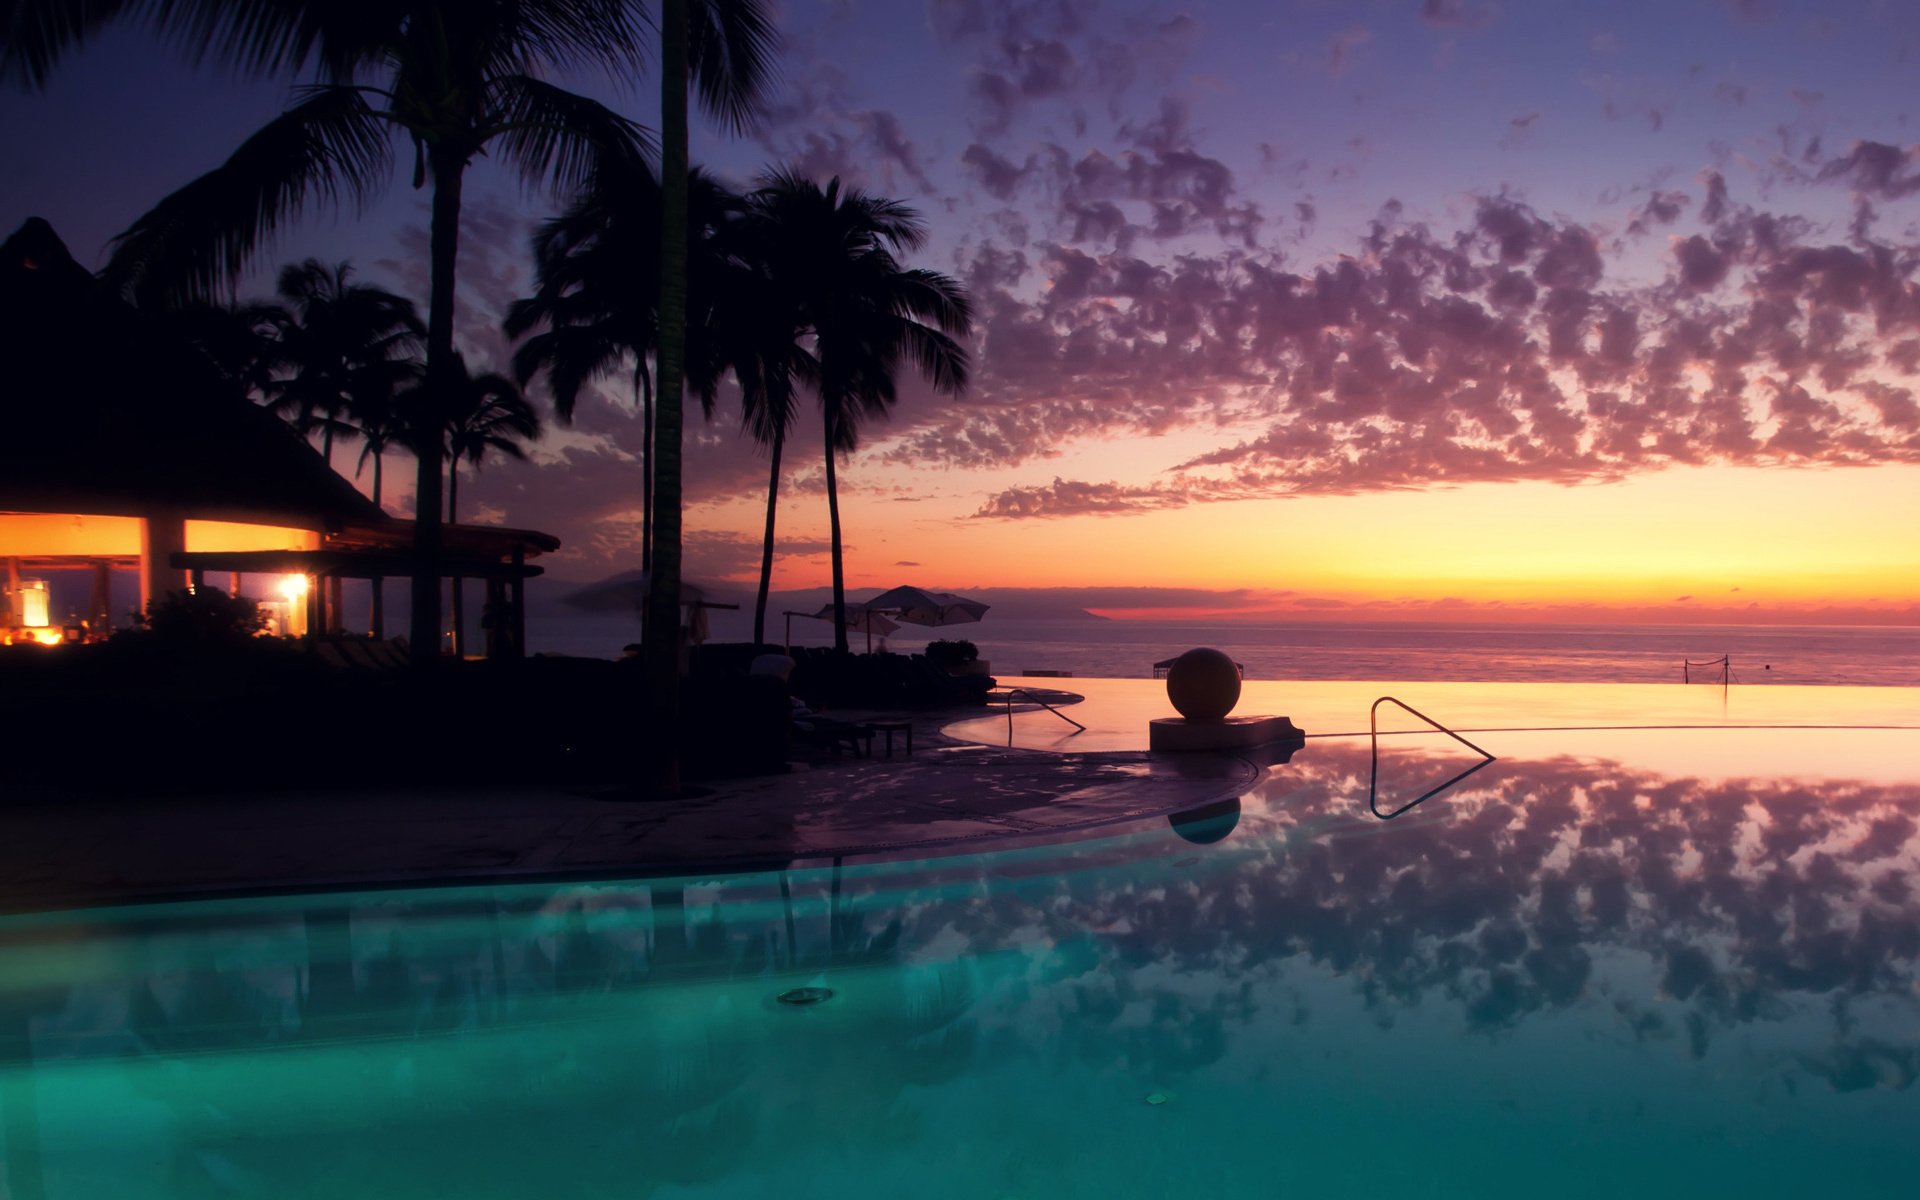 mexico, Puerto, Vallarta, Resort, Vacation, Travel, World, Architecture, Buildings, Cabana, Reflection, Sunset, Sunrise, Sky, Clouds, Palm, Pool, Tropical Wallpaper